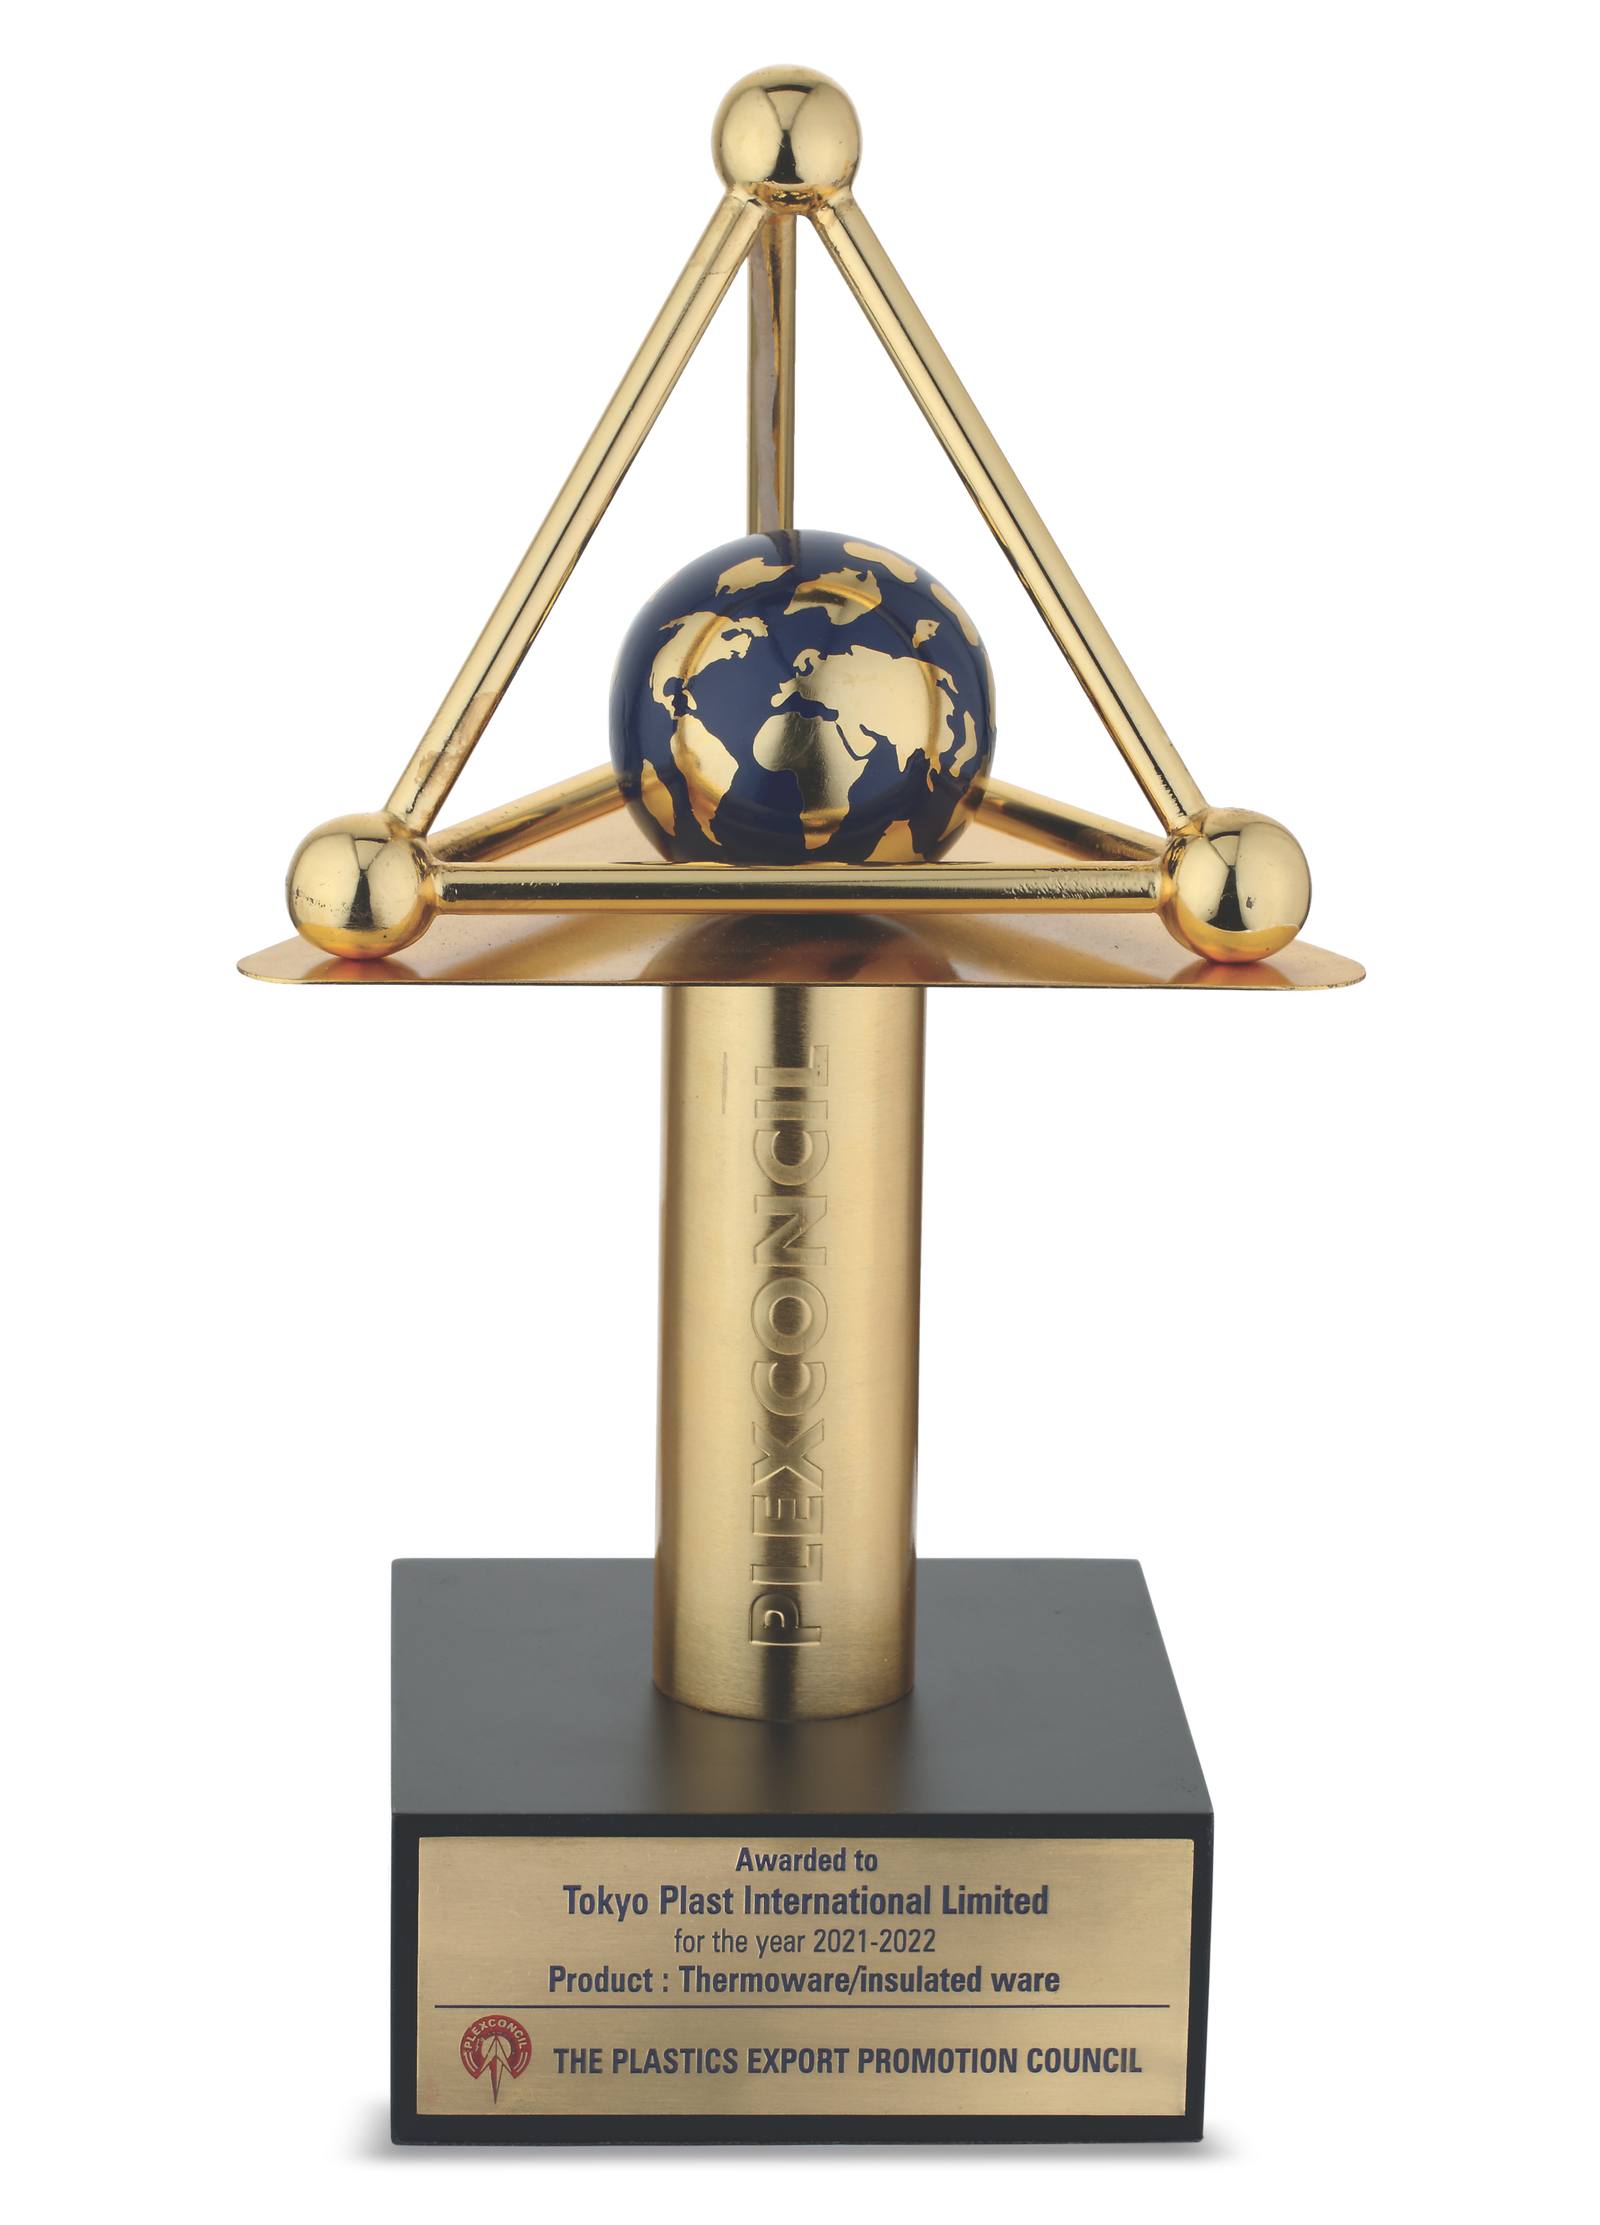 https://www.pinnaclethermo.com/assets/images/awards.png